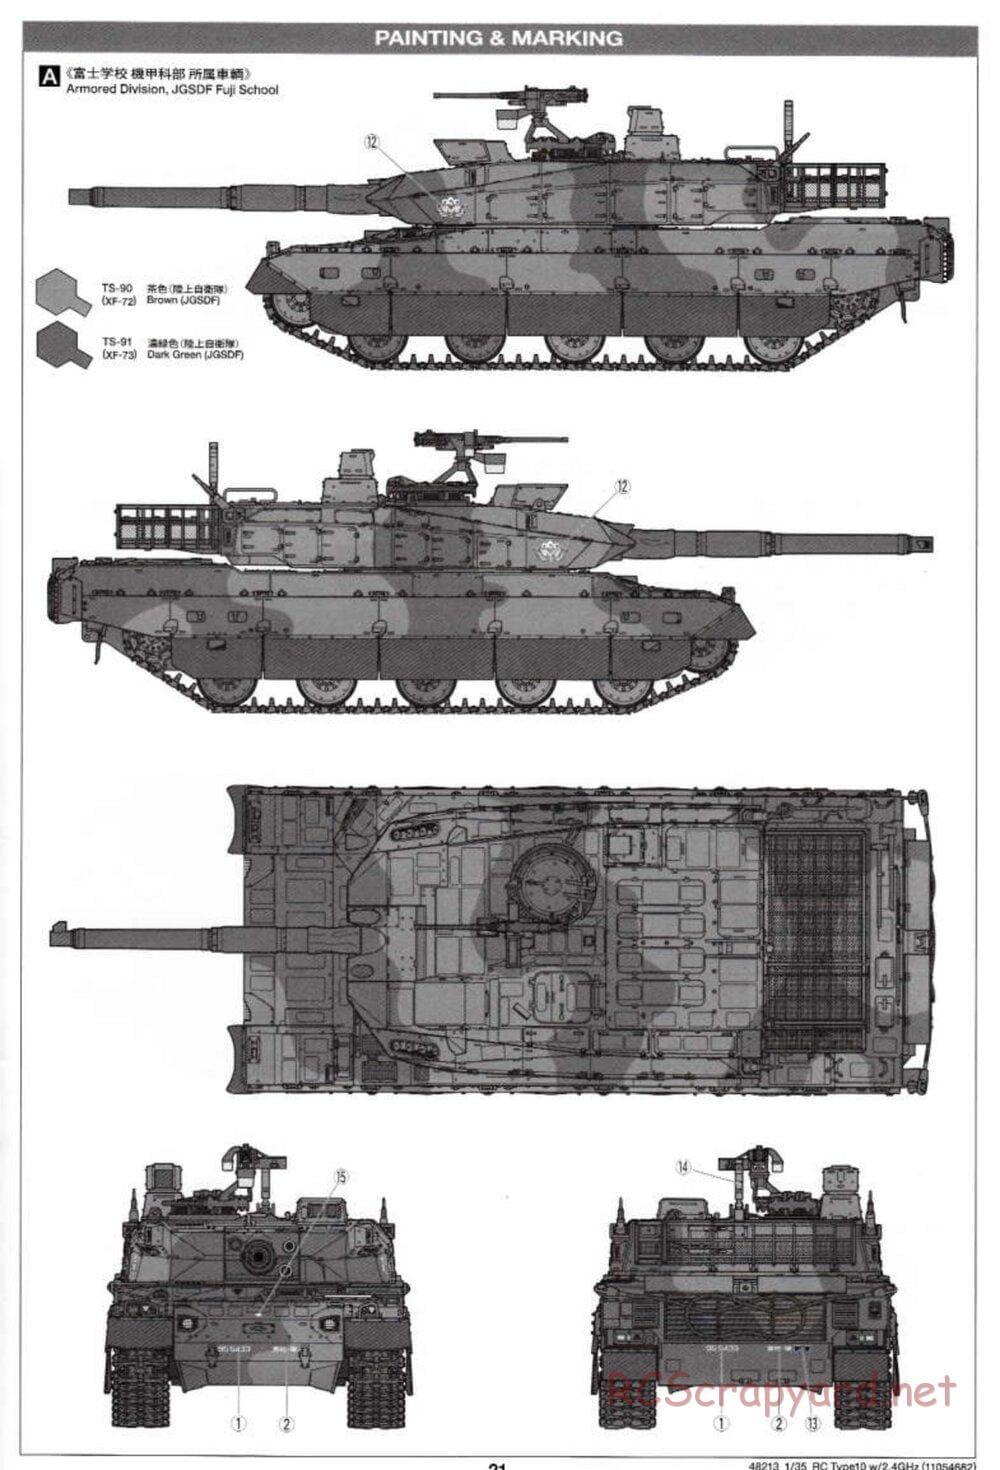 Tamiya - JGSDF Type 10 Tank - 1/35 Scale Chassis - Manual - Page 21